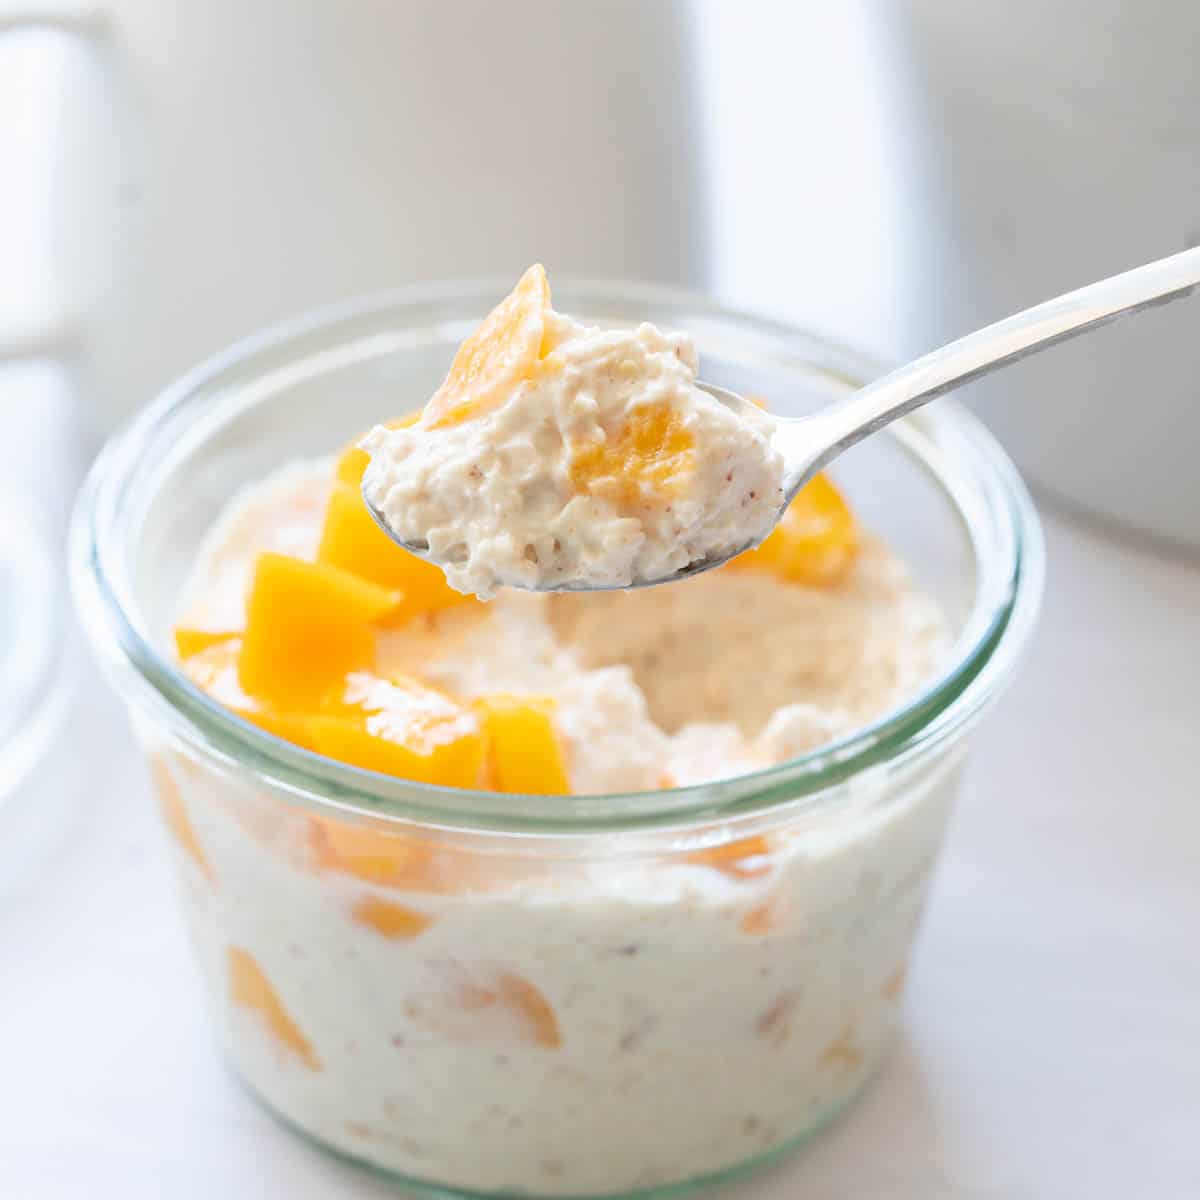 A spoonful of creamy white oats studded with small pieces of peach.